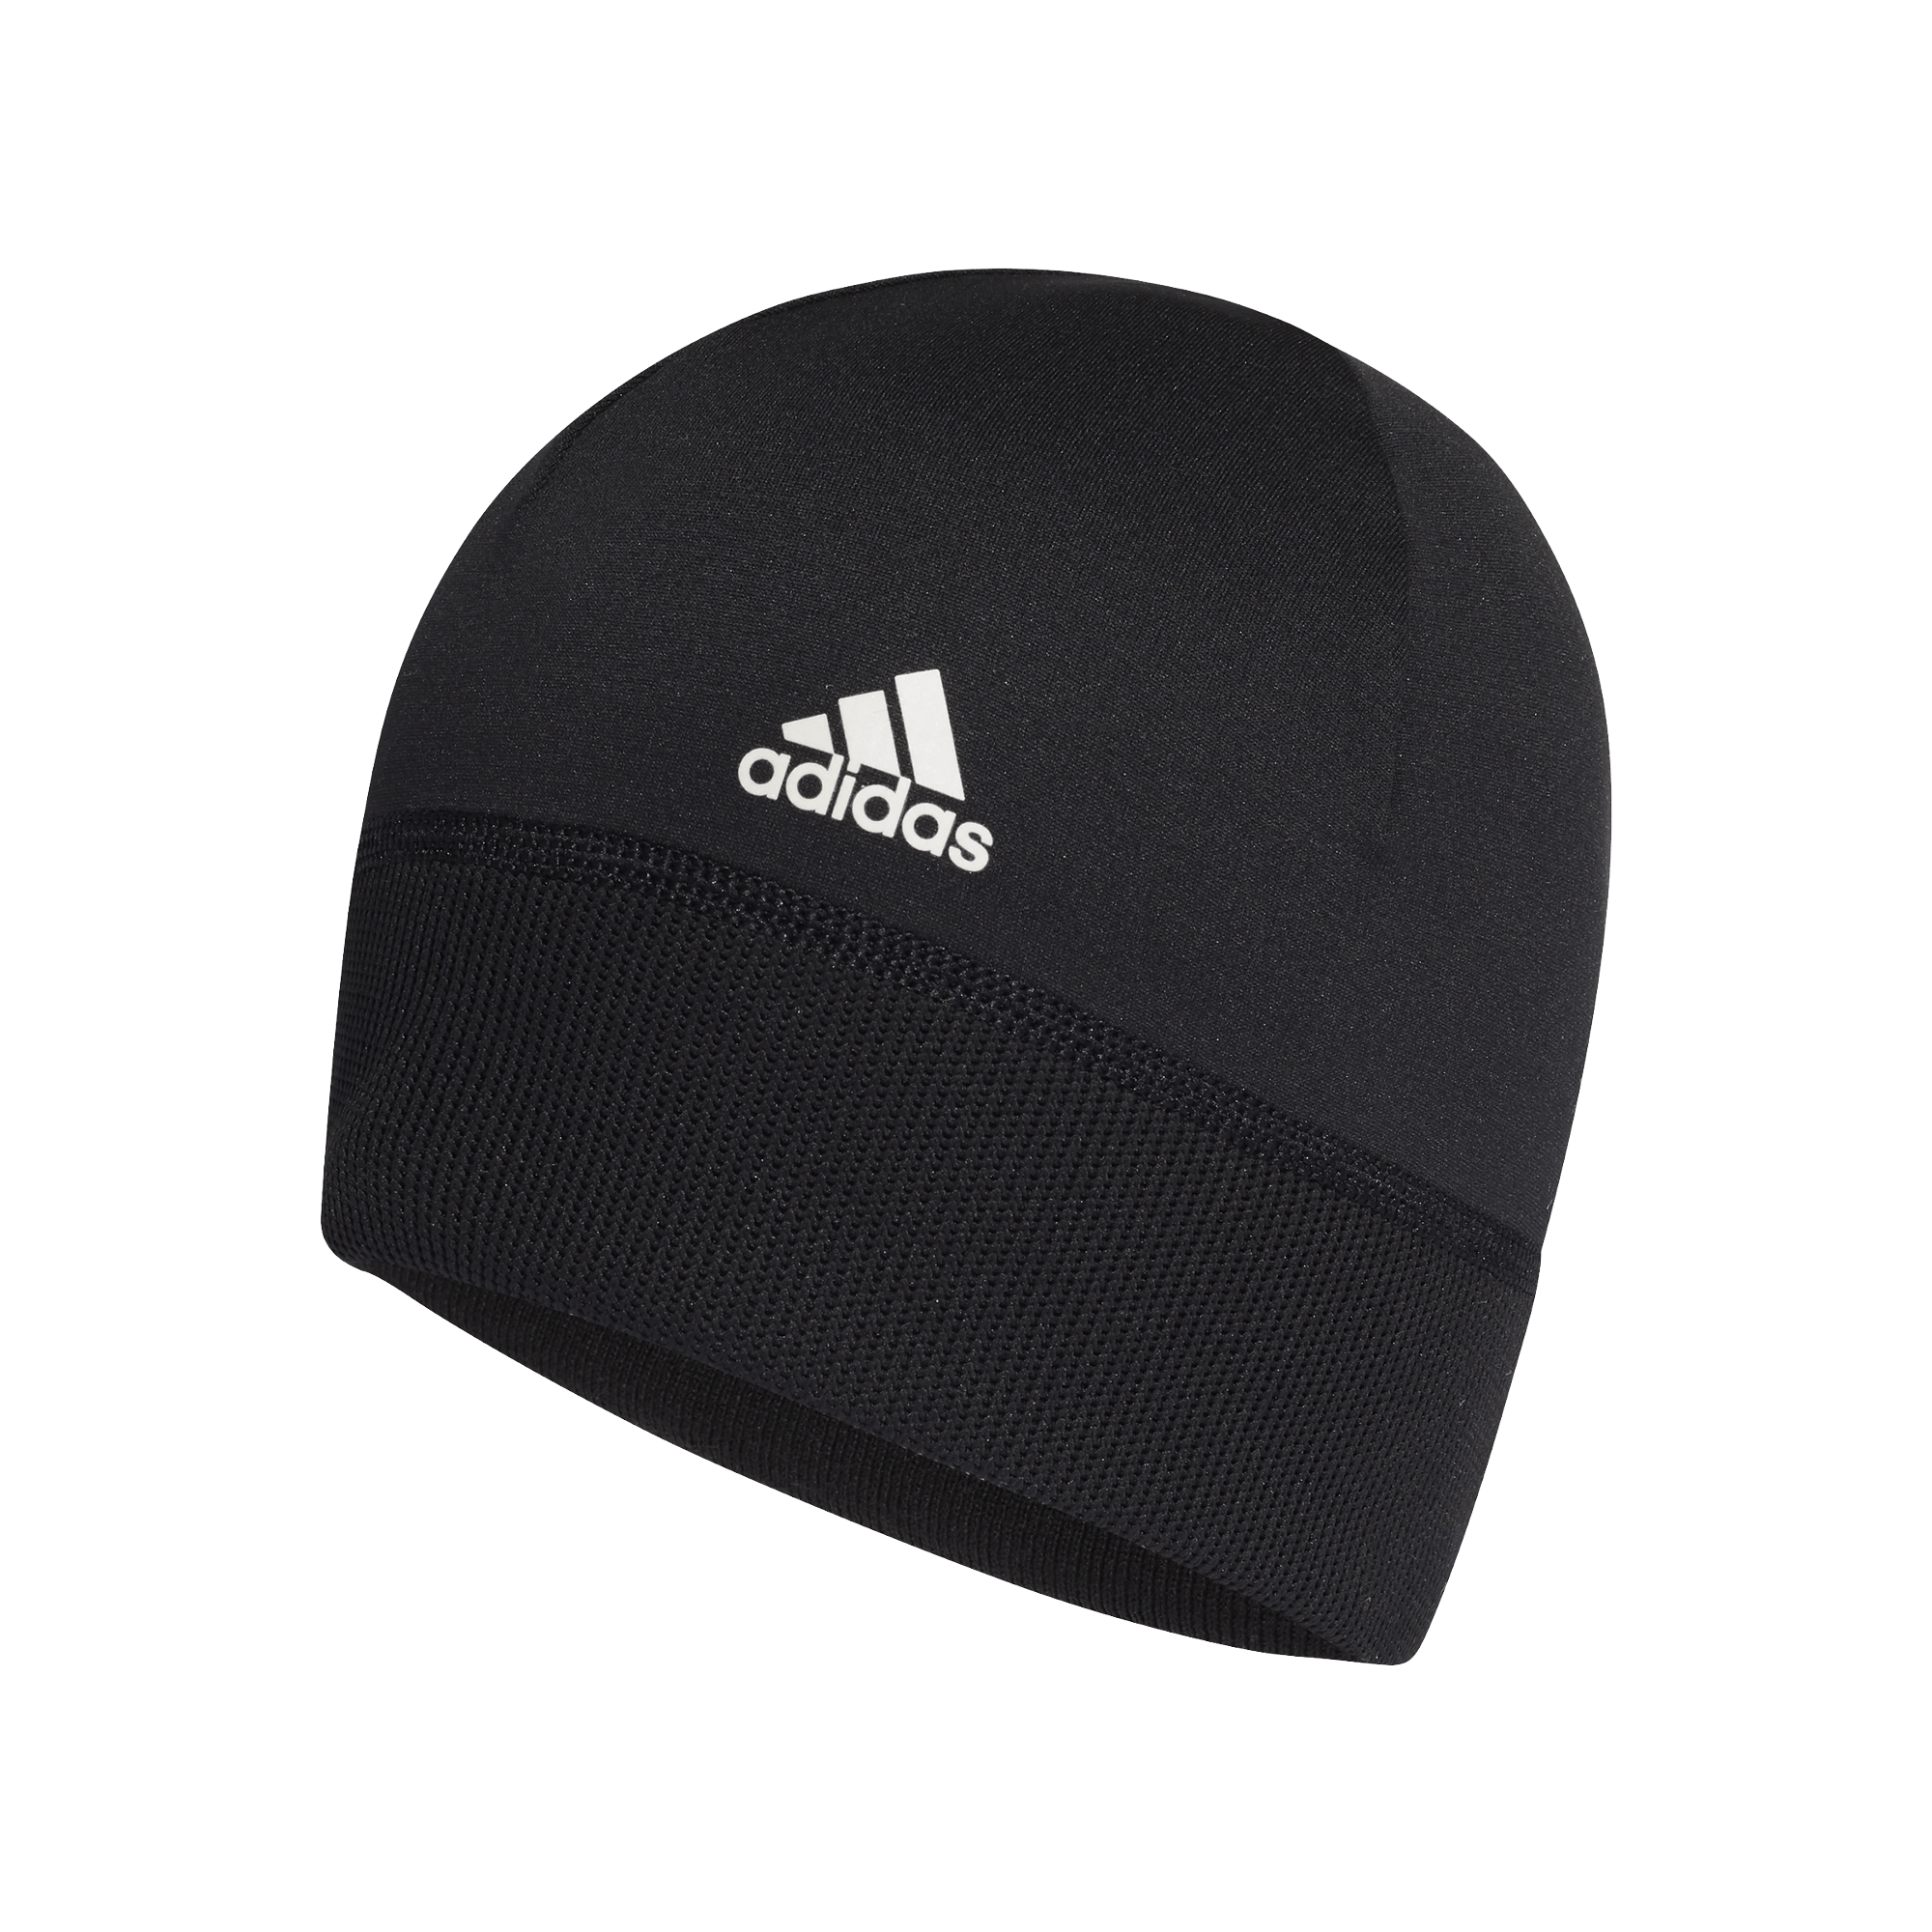 All Blacks Rugby Beanie New Zealand 2021 Wicking Polyester Beanie by Adidas - World Rugby